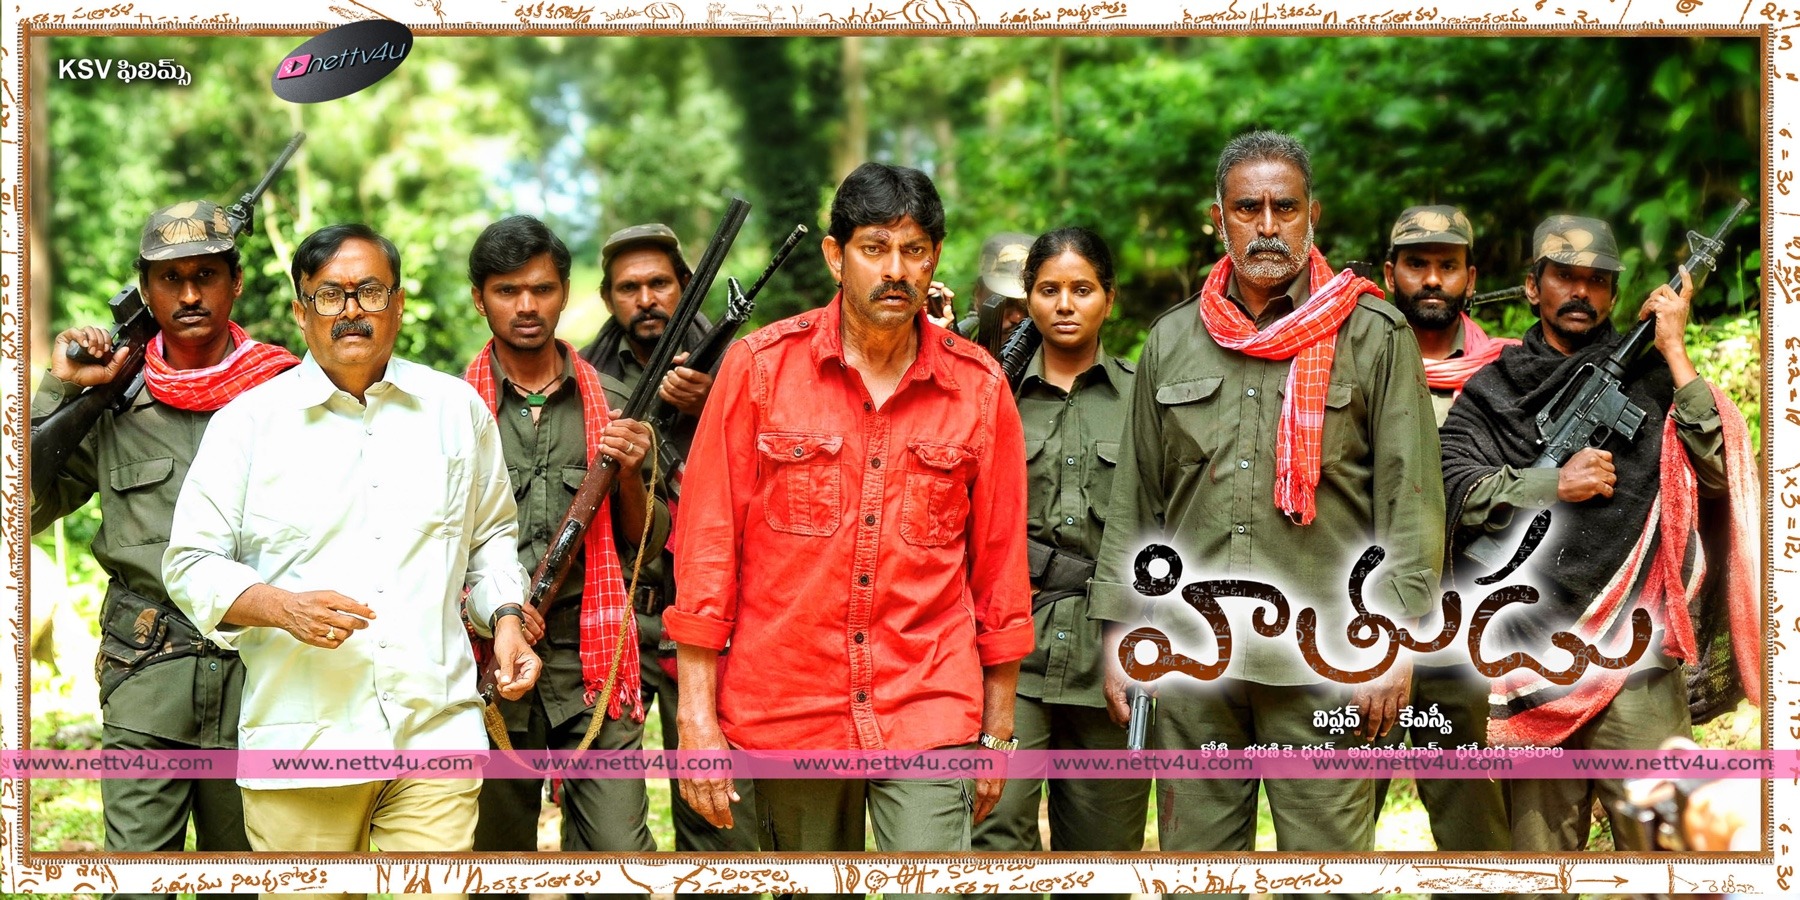 hithudu movie posters 06